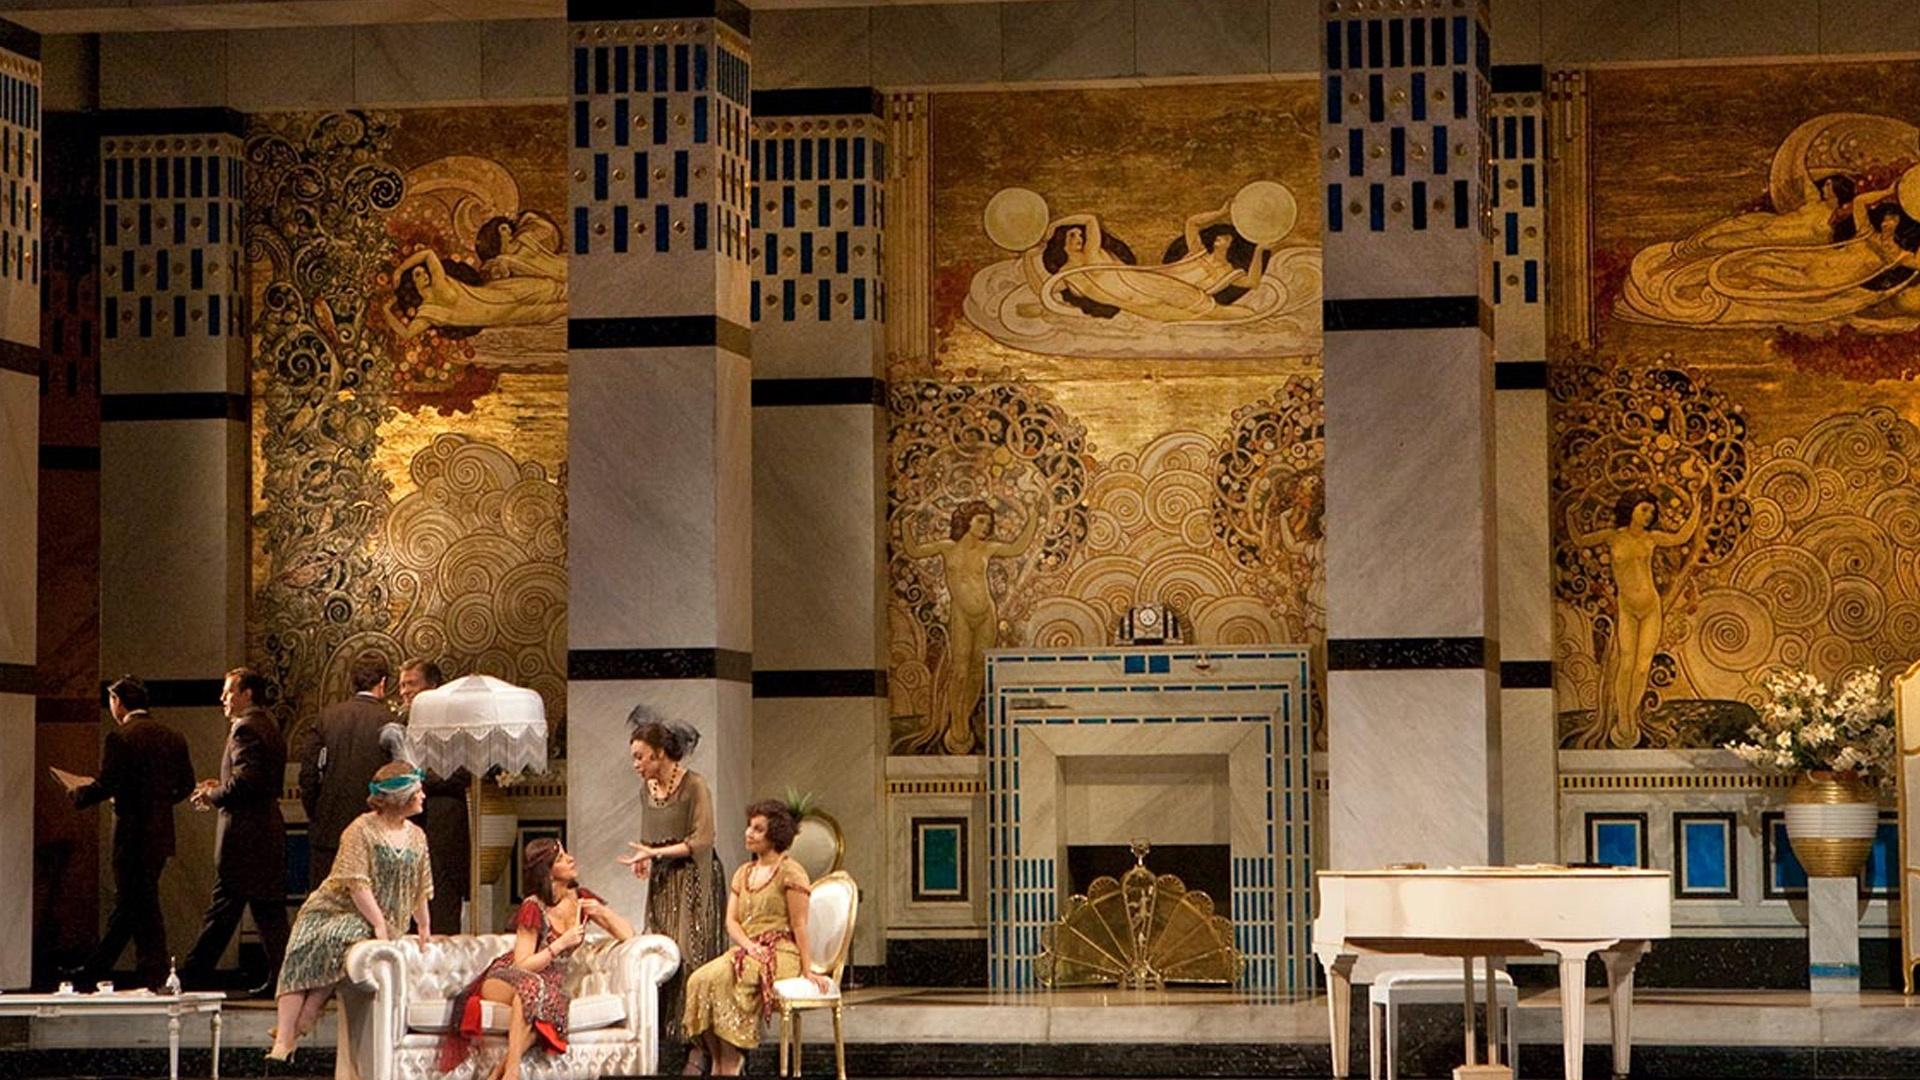 a scene from La Rondine where women, dressed in fancy clothing, are gathered together and conversing with one another